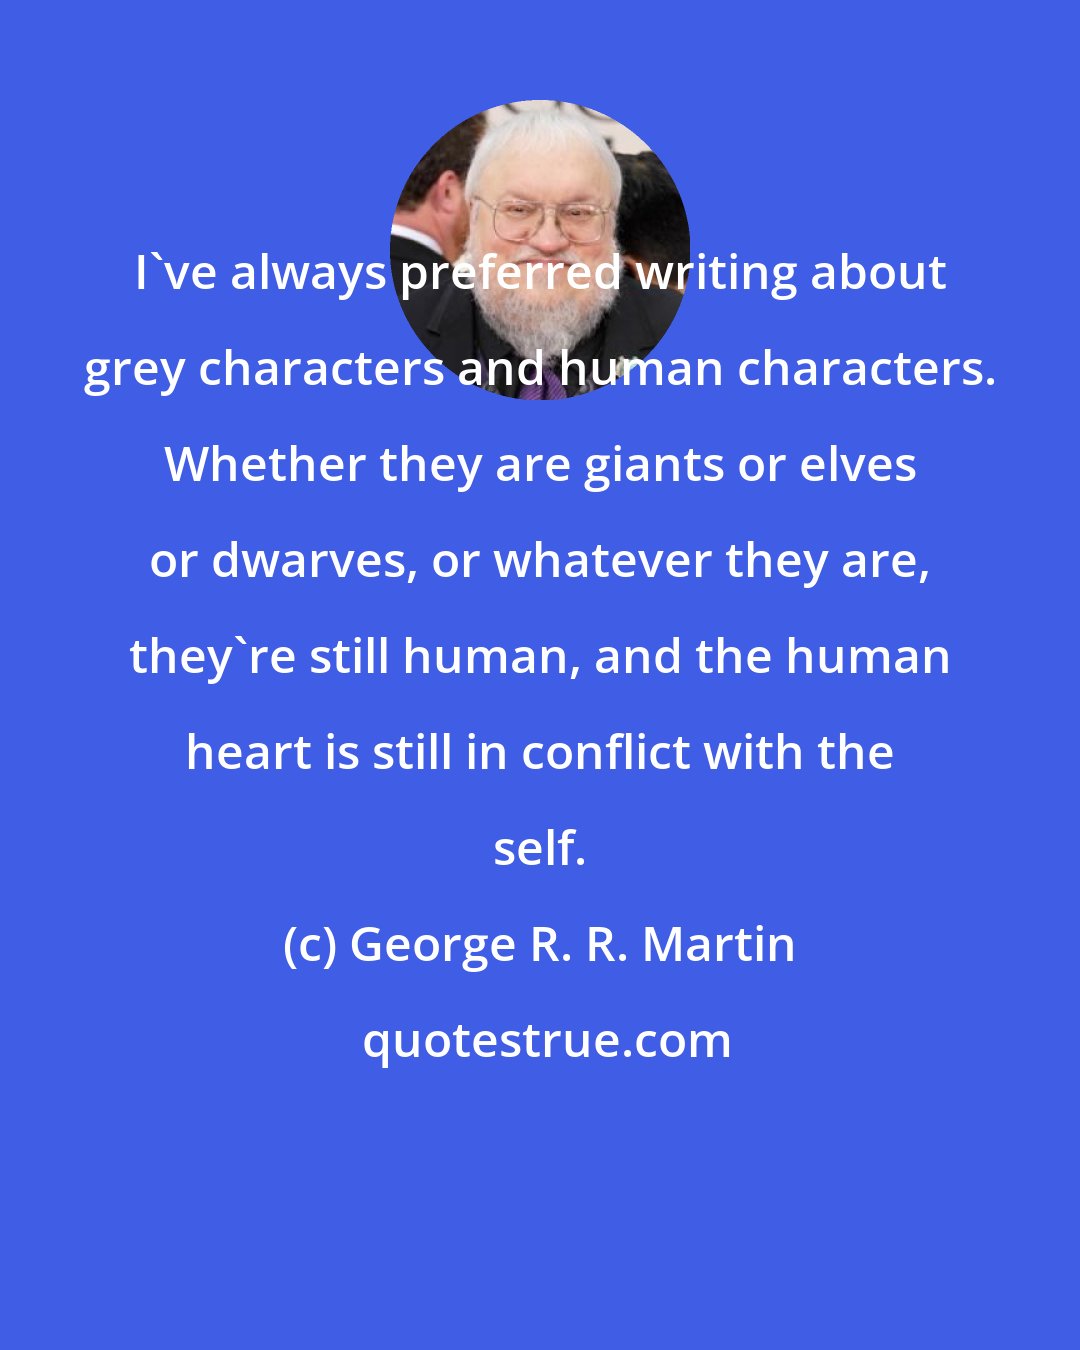 George R. R. Martin: I've always preferred writing about grey characters and human characters. Whether they are giants or elves or dwarves, or whatever they are, they're still human, and the human heart is still in conflict with the self.